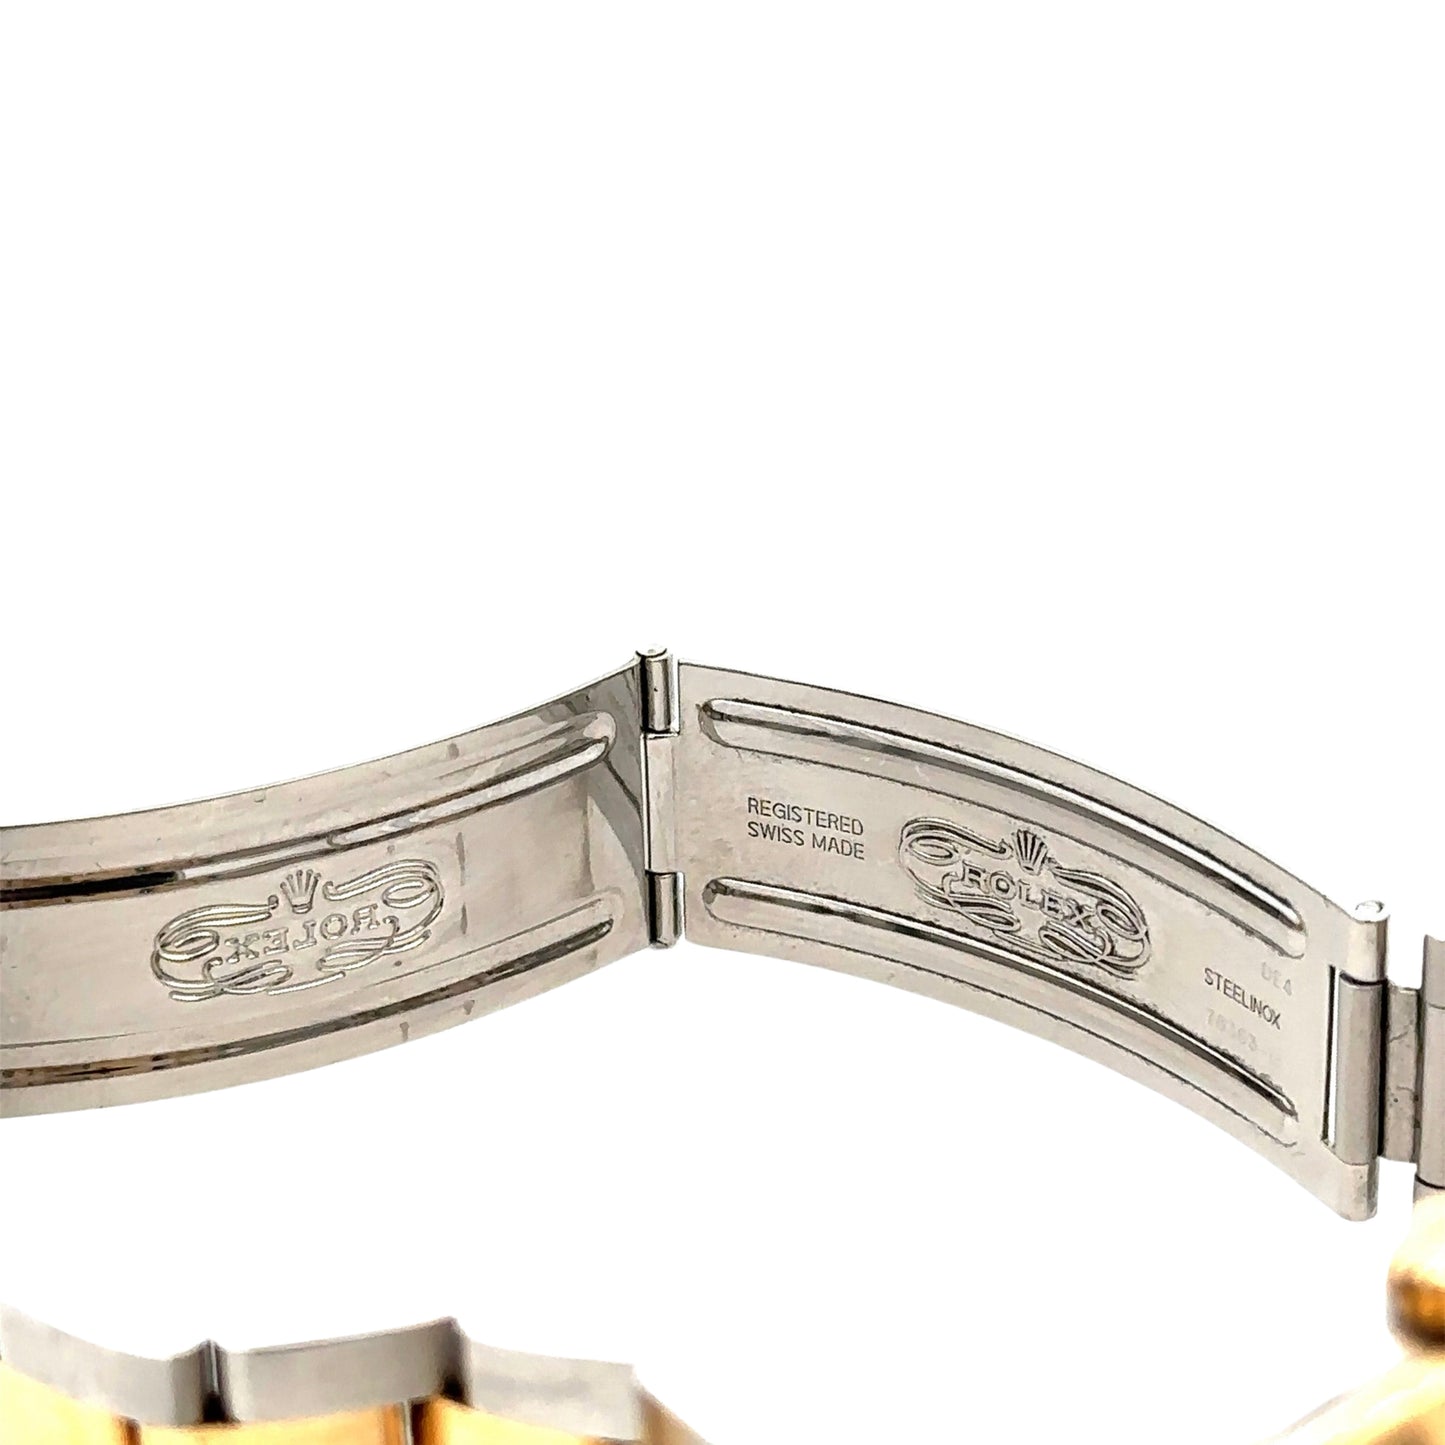 Inside of clasp with Rolex + steelknox stamp